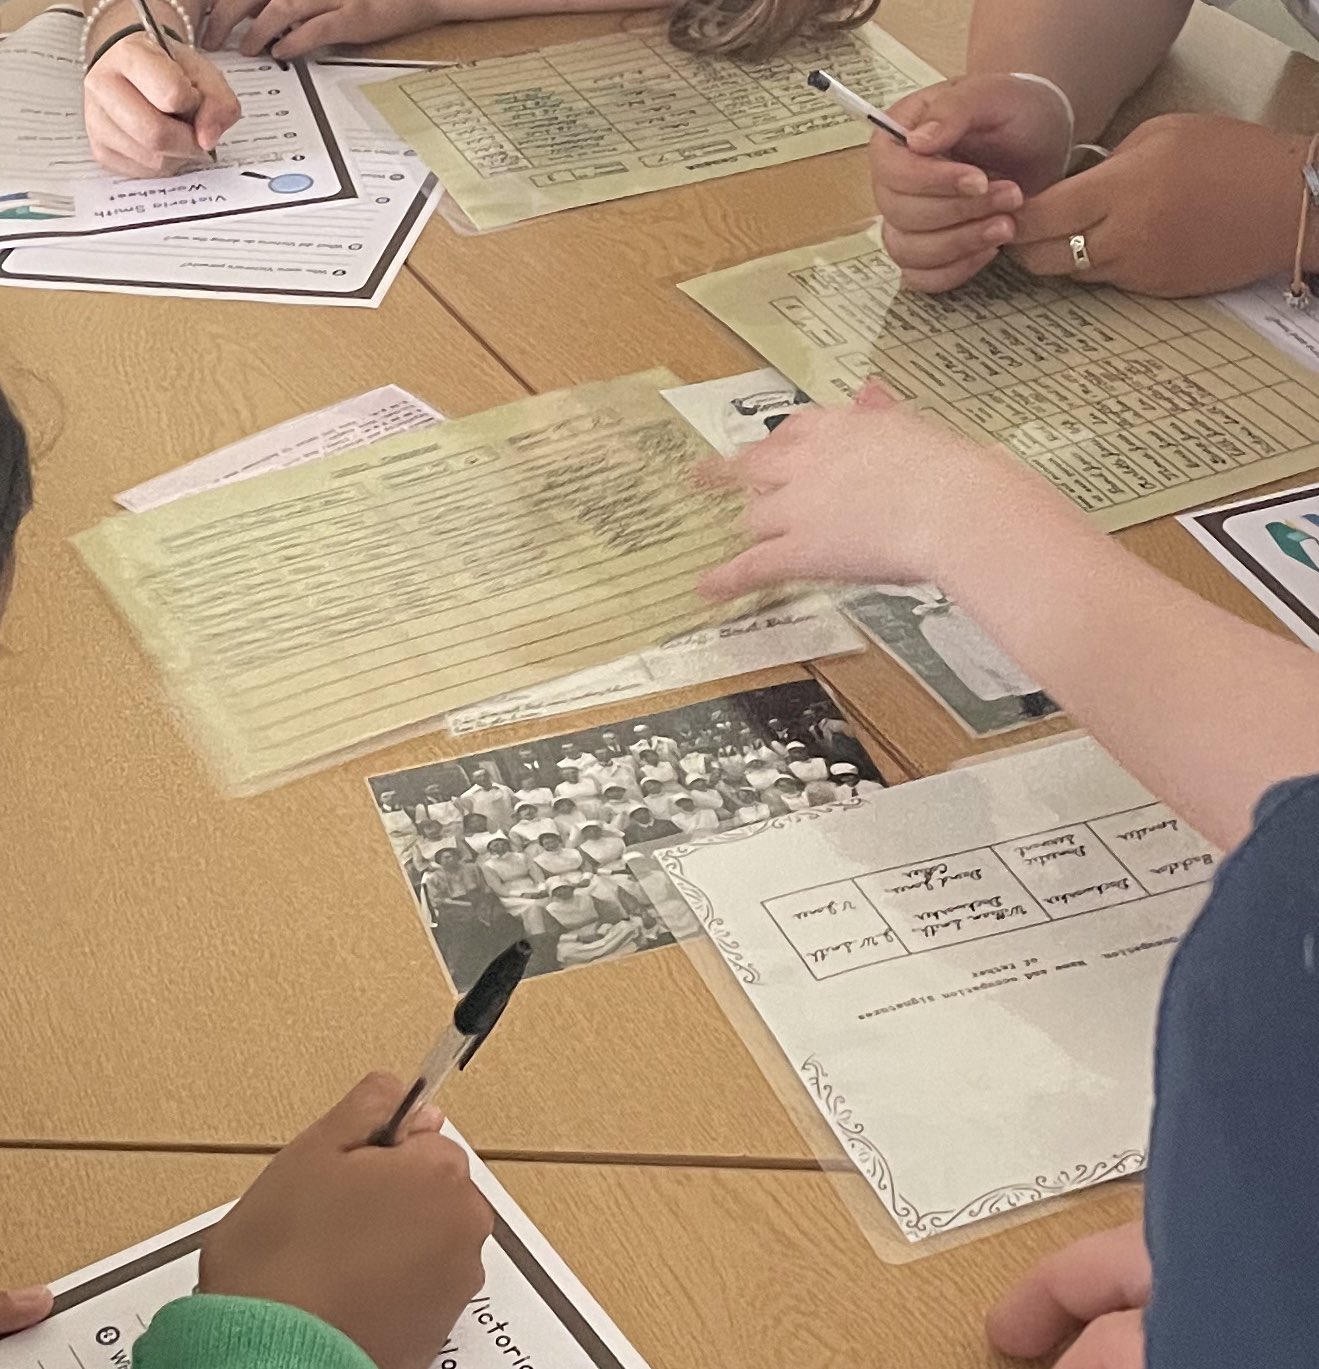 Hands look through materials including census', a photograph of nurses from WW1 and a marriage certificate